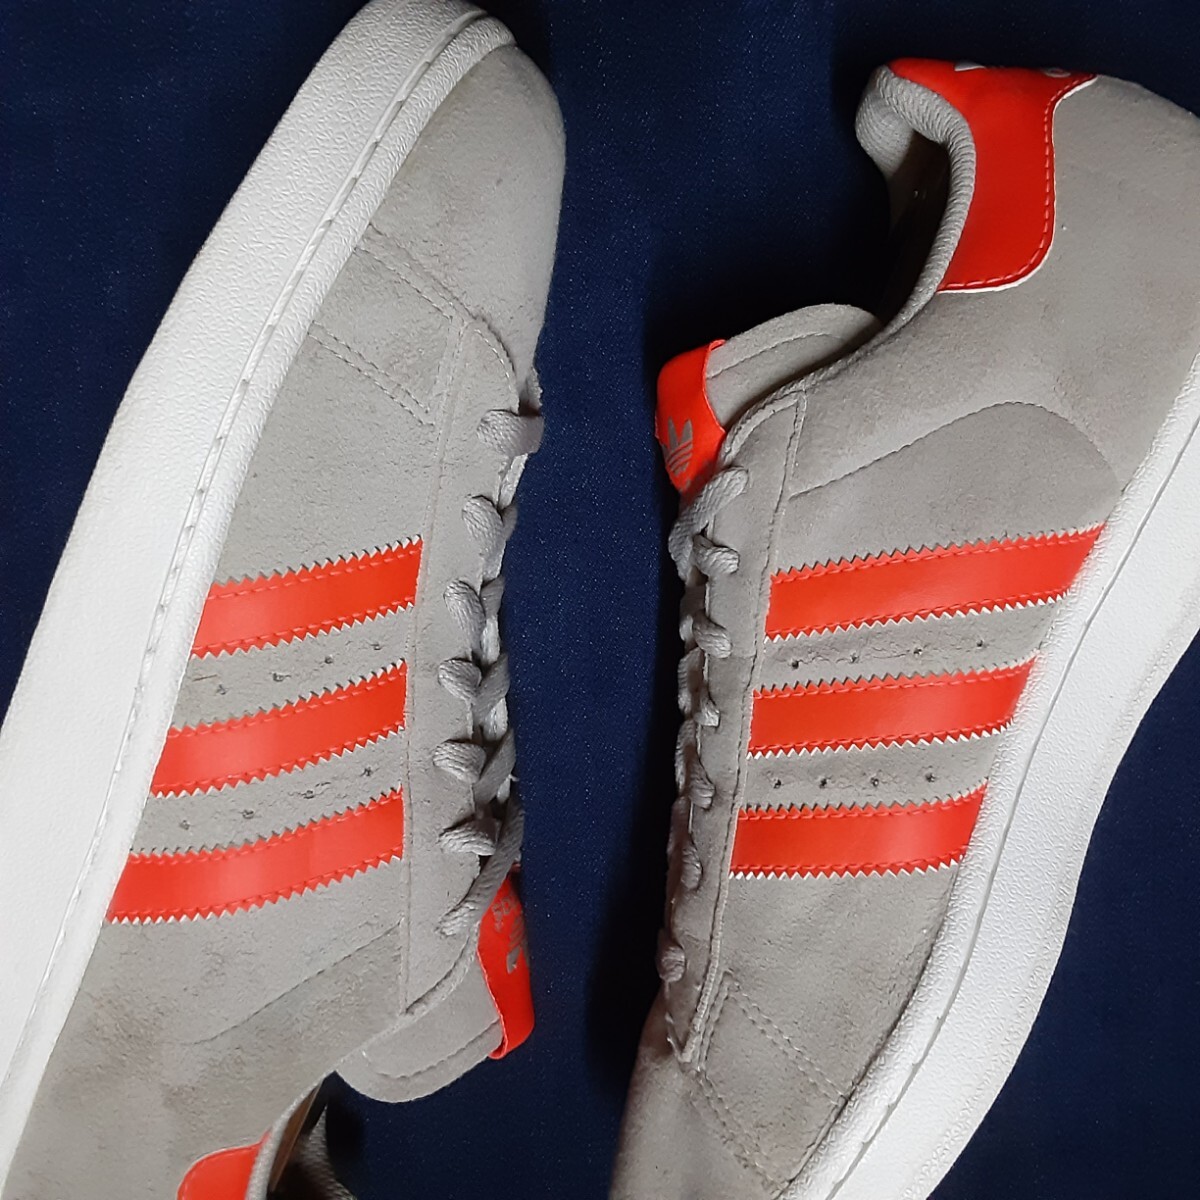  most price! superior article! reissue neon stripe! masterpiece archive design! Adidas campus 2 high class n back leather sneakers! gray! grey orange white 26.5cm